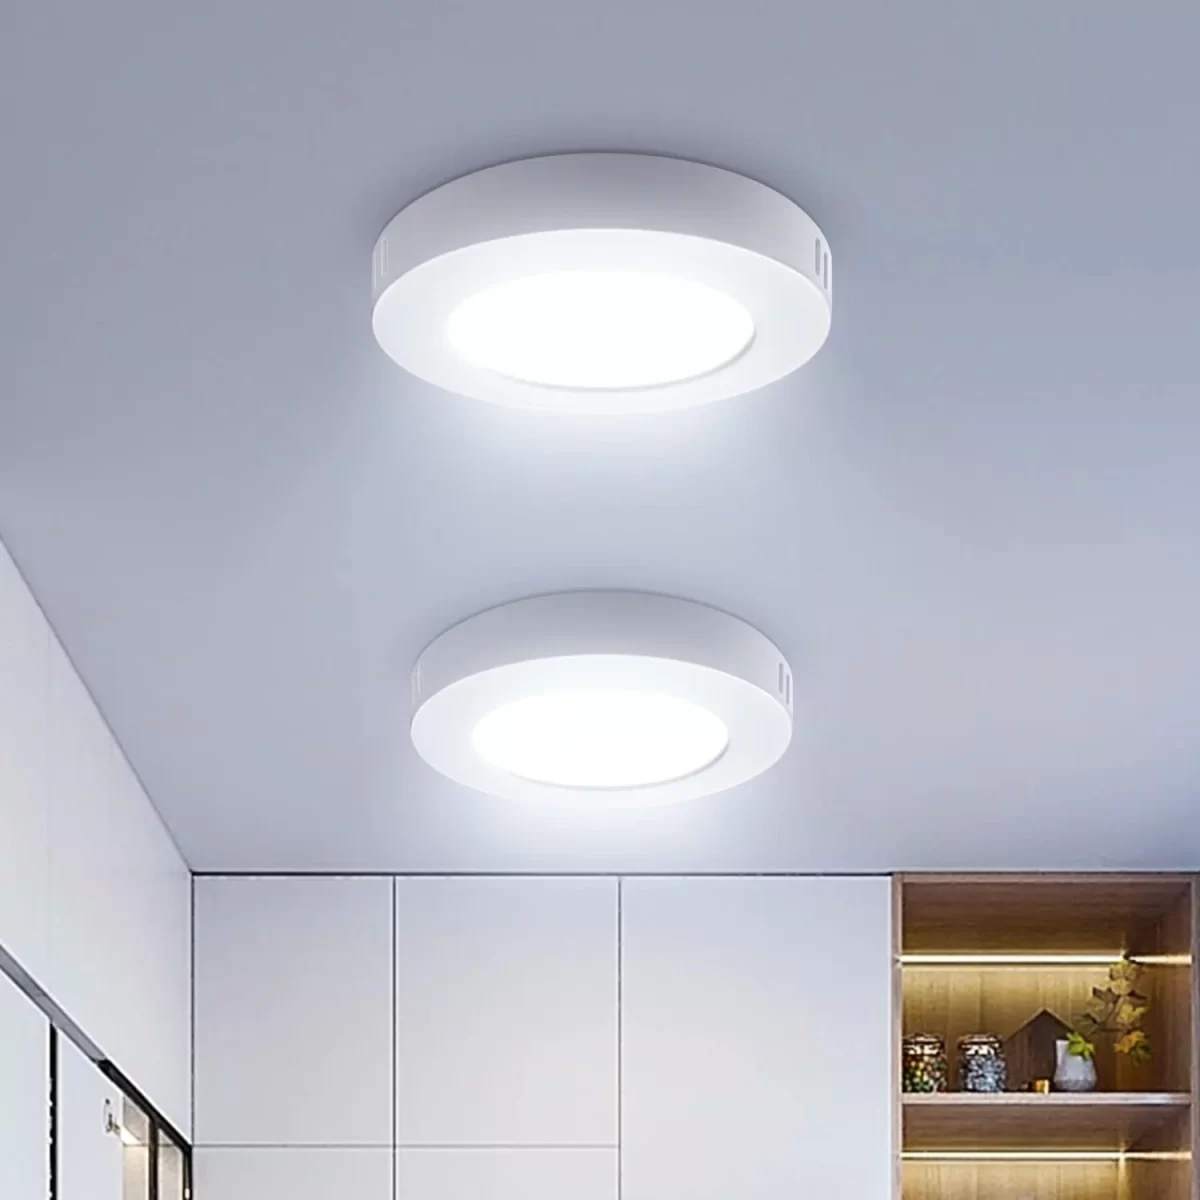 A Comprehensive Guide to Choosing Ceiling Lights